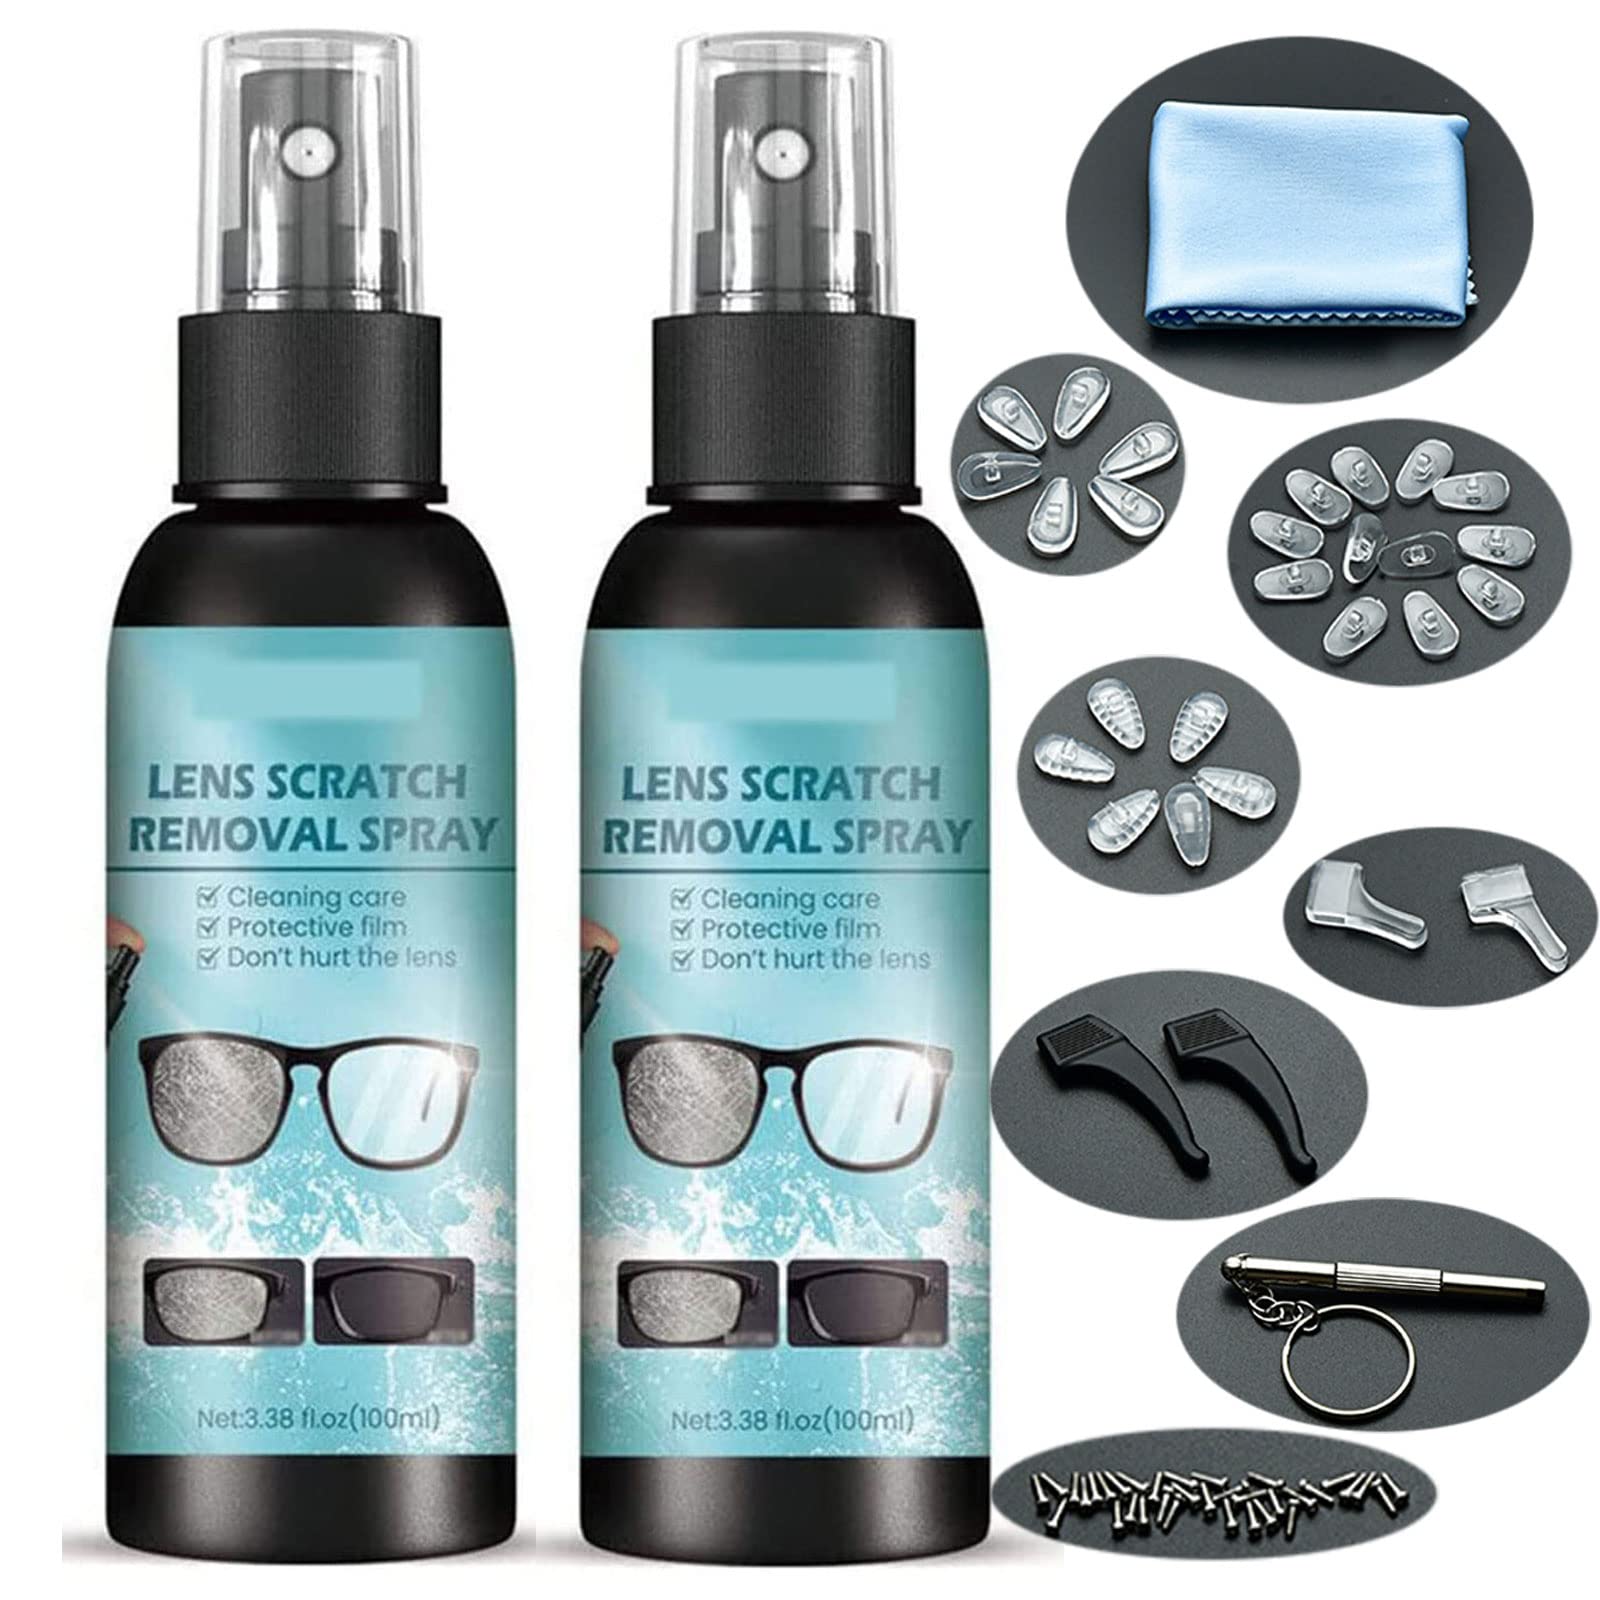 Cheap Malinaisi 2pcs Lens Scratch Removal Spray for Lens Glass